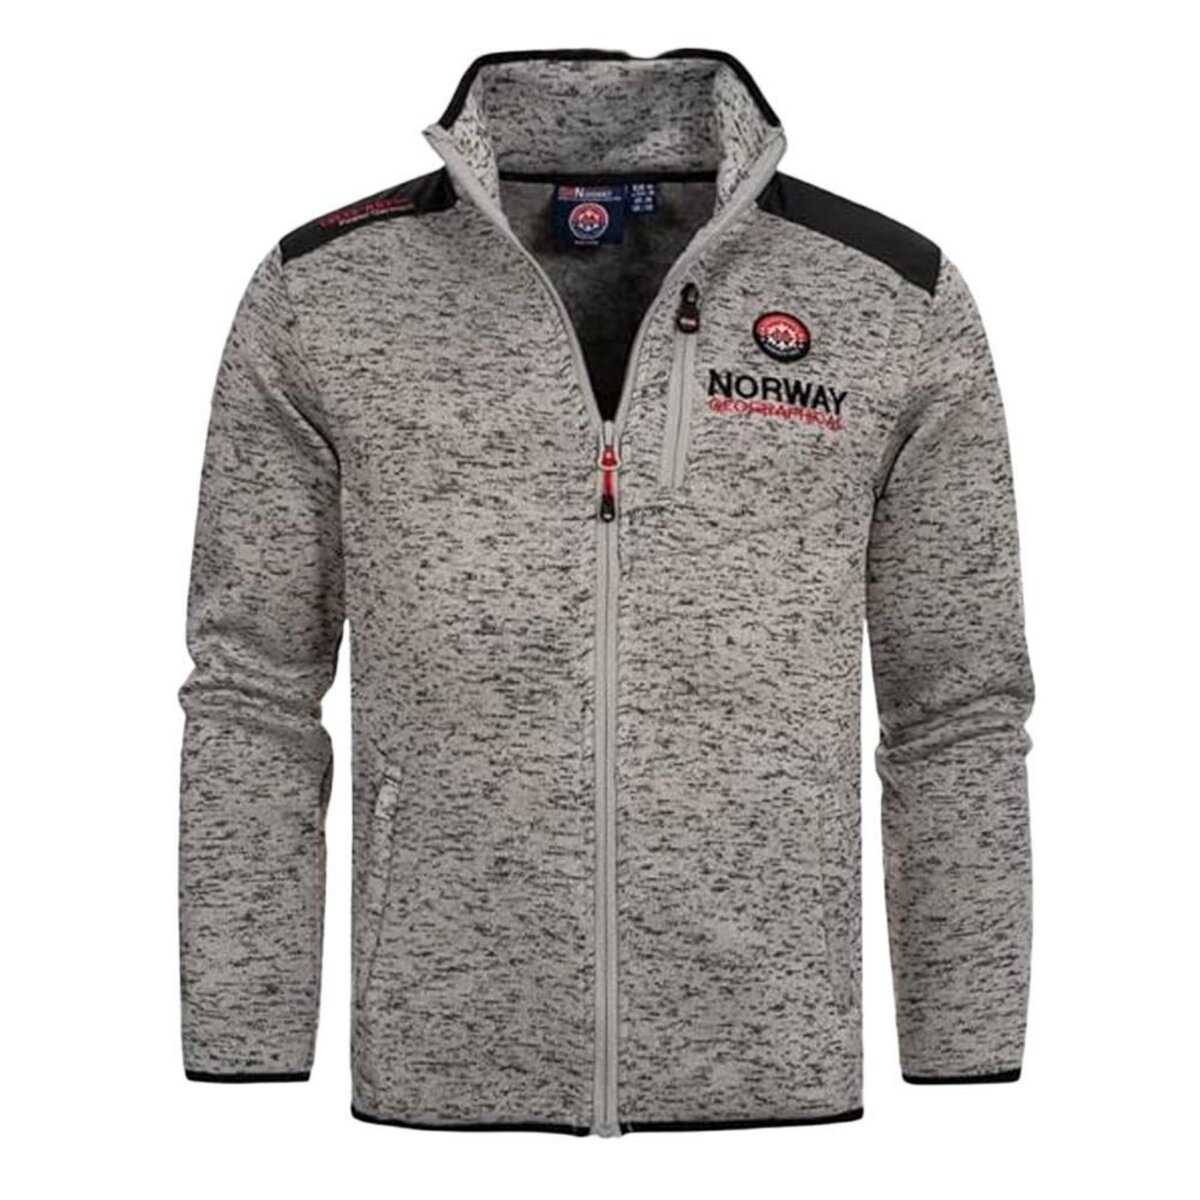 GEOGRAPHICAL NORWAY Polaire Gris/Noir Homme Geographical Norway Tavid Men